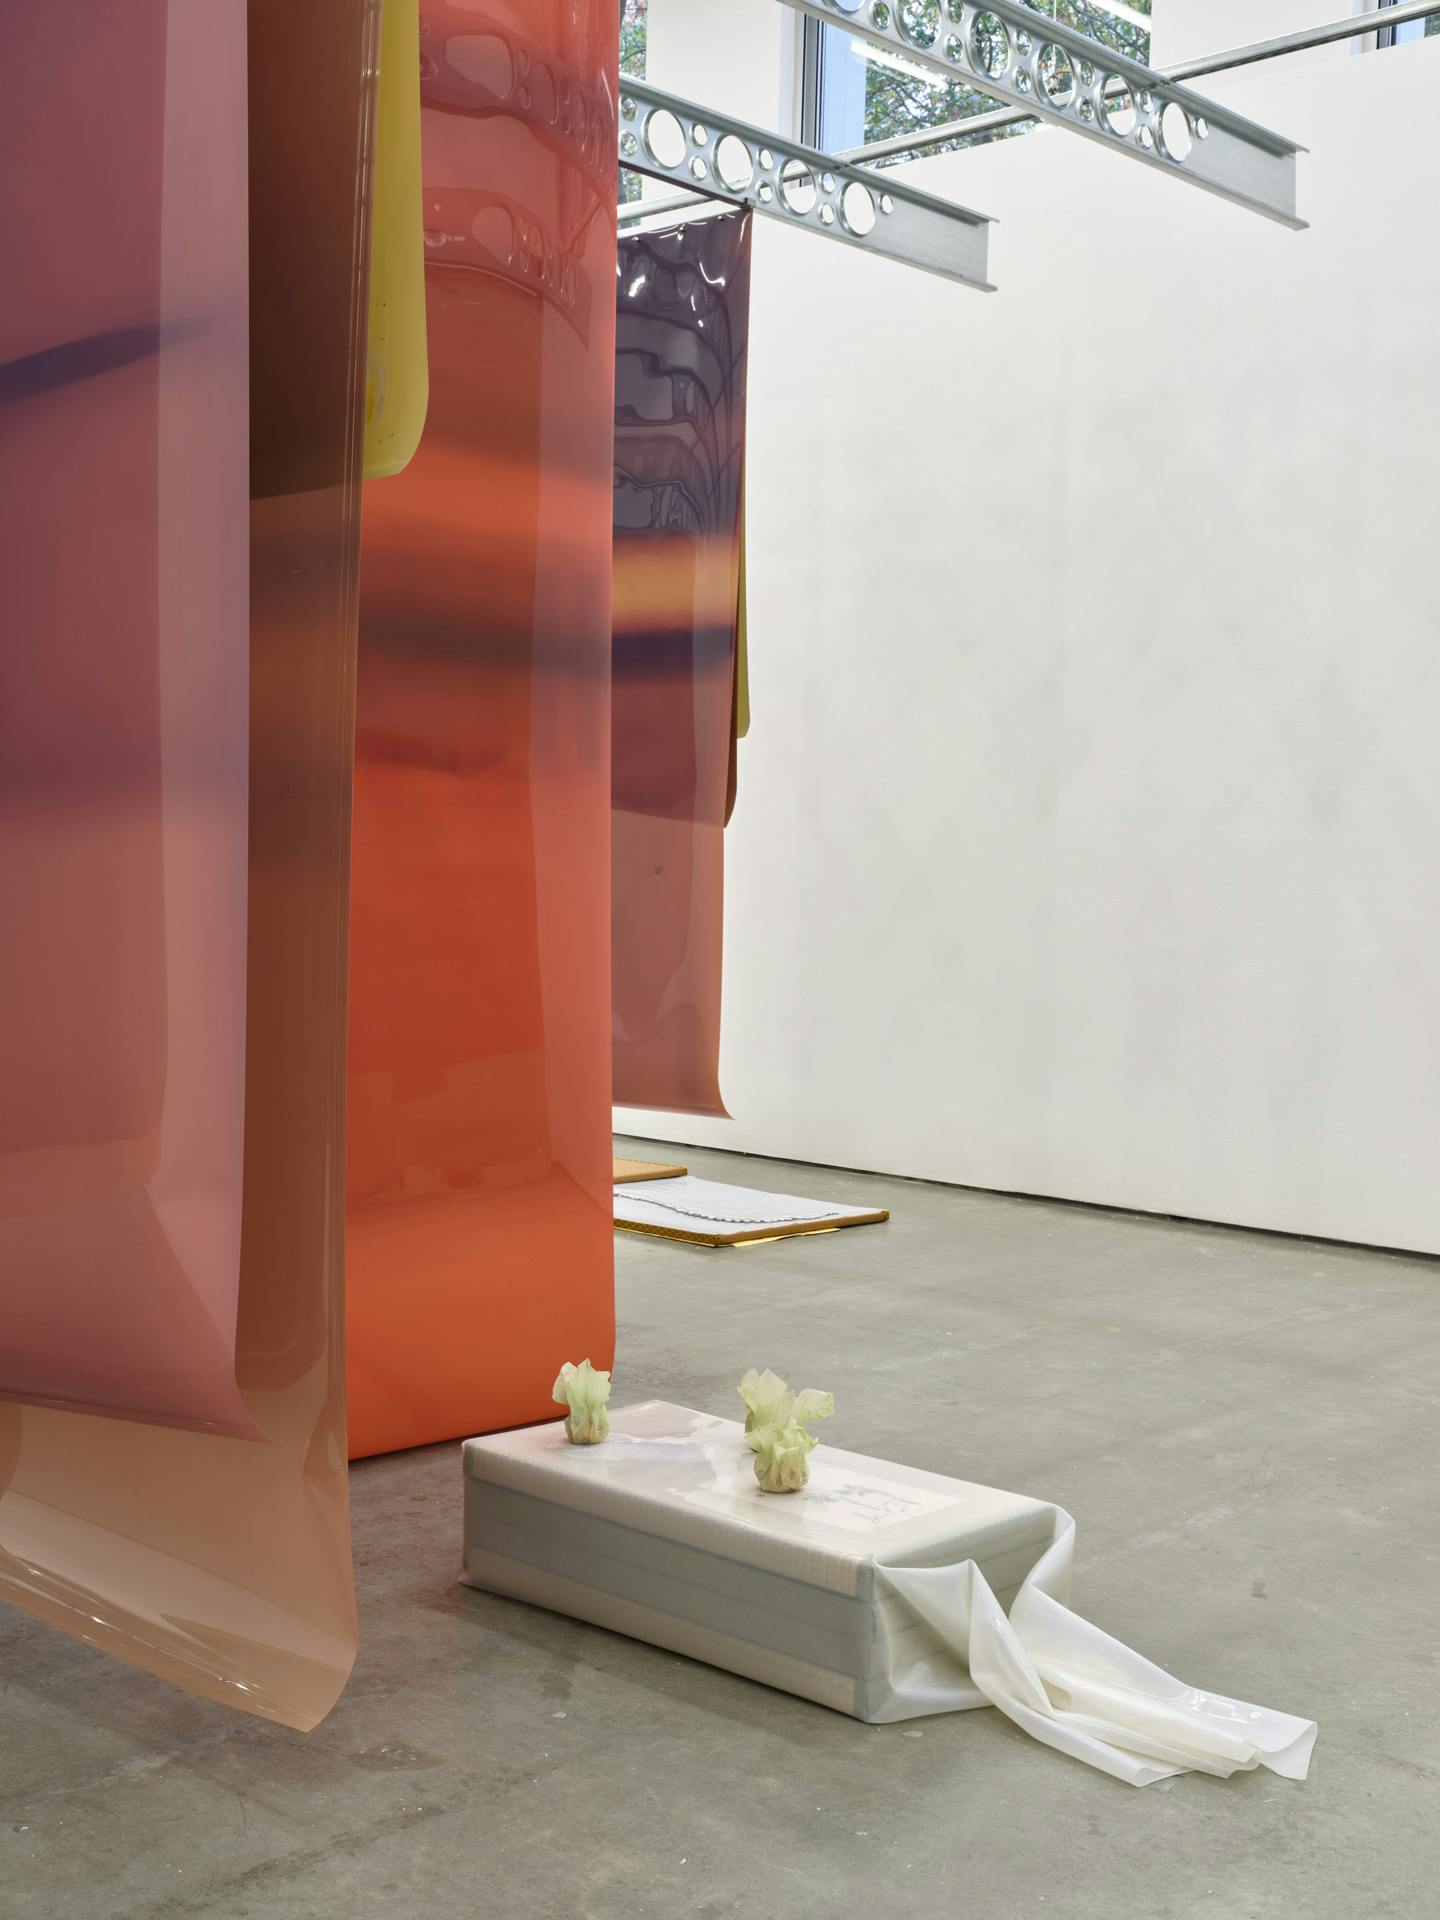 Long earth tone sheets of film of various colours suspended from metal ceiling beams. A small box supporting three fruit is visible between two perpendicular sheets of film. A sculpture of tatami mats and cast aluminum objects sits in the background.